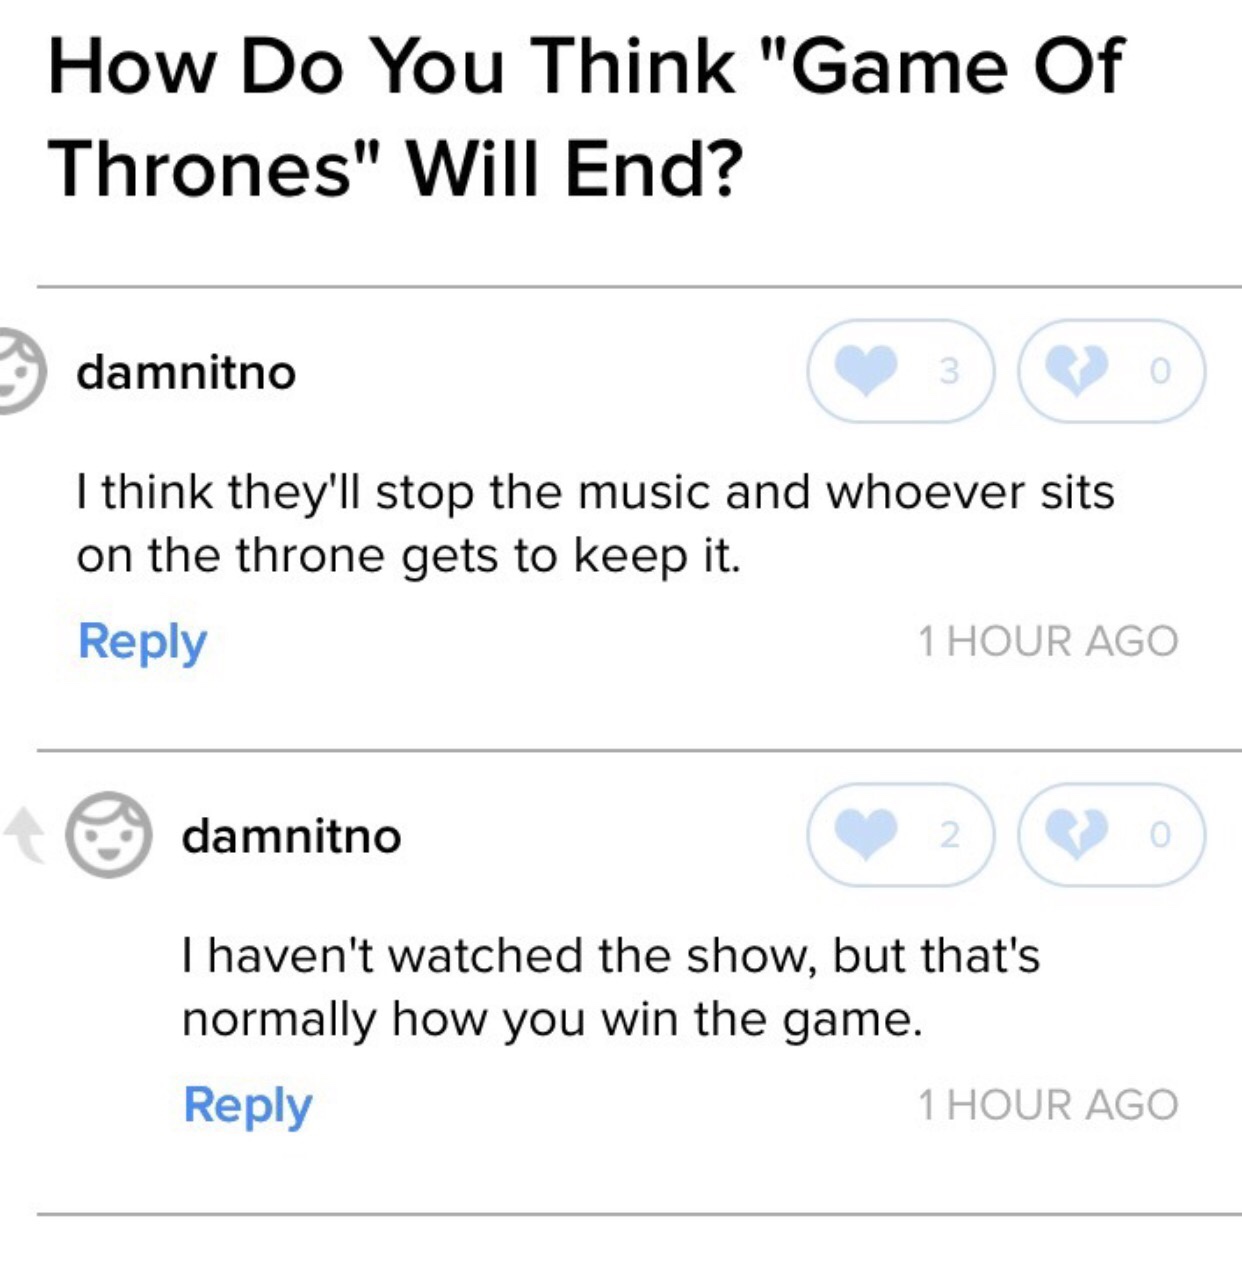 funny meme of number - How Do You Think "Game Of Thrones" Will End? damnitno I think they'll stop the music and whoever sits on the throne gets to keep it. 1 Hour Ago damnitno I haven't watched the show, but that's normally how you win the game. 1 Hour Ag